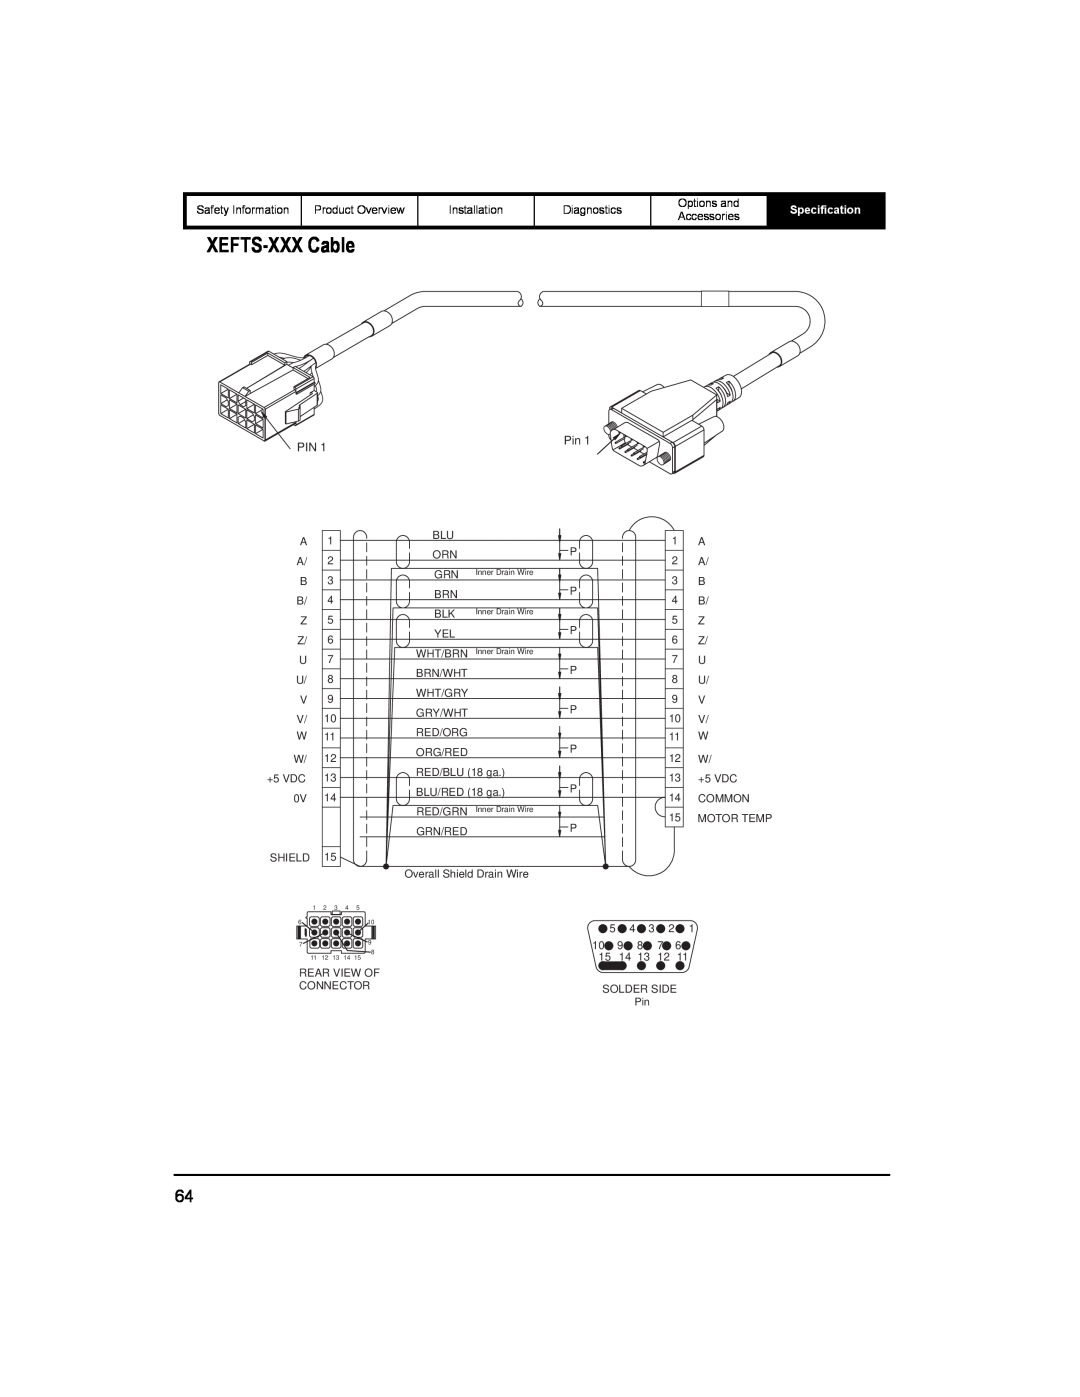 Emerson 400518-01 installation manual XEFTS-XXX Cable, Specification 